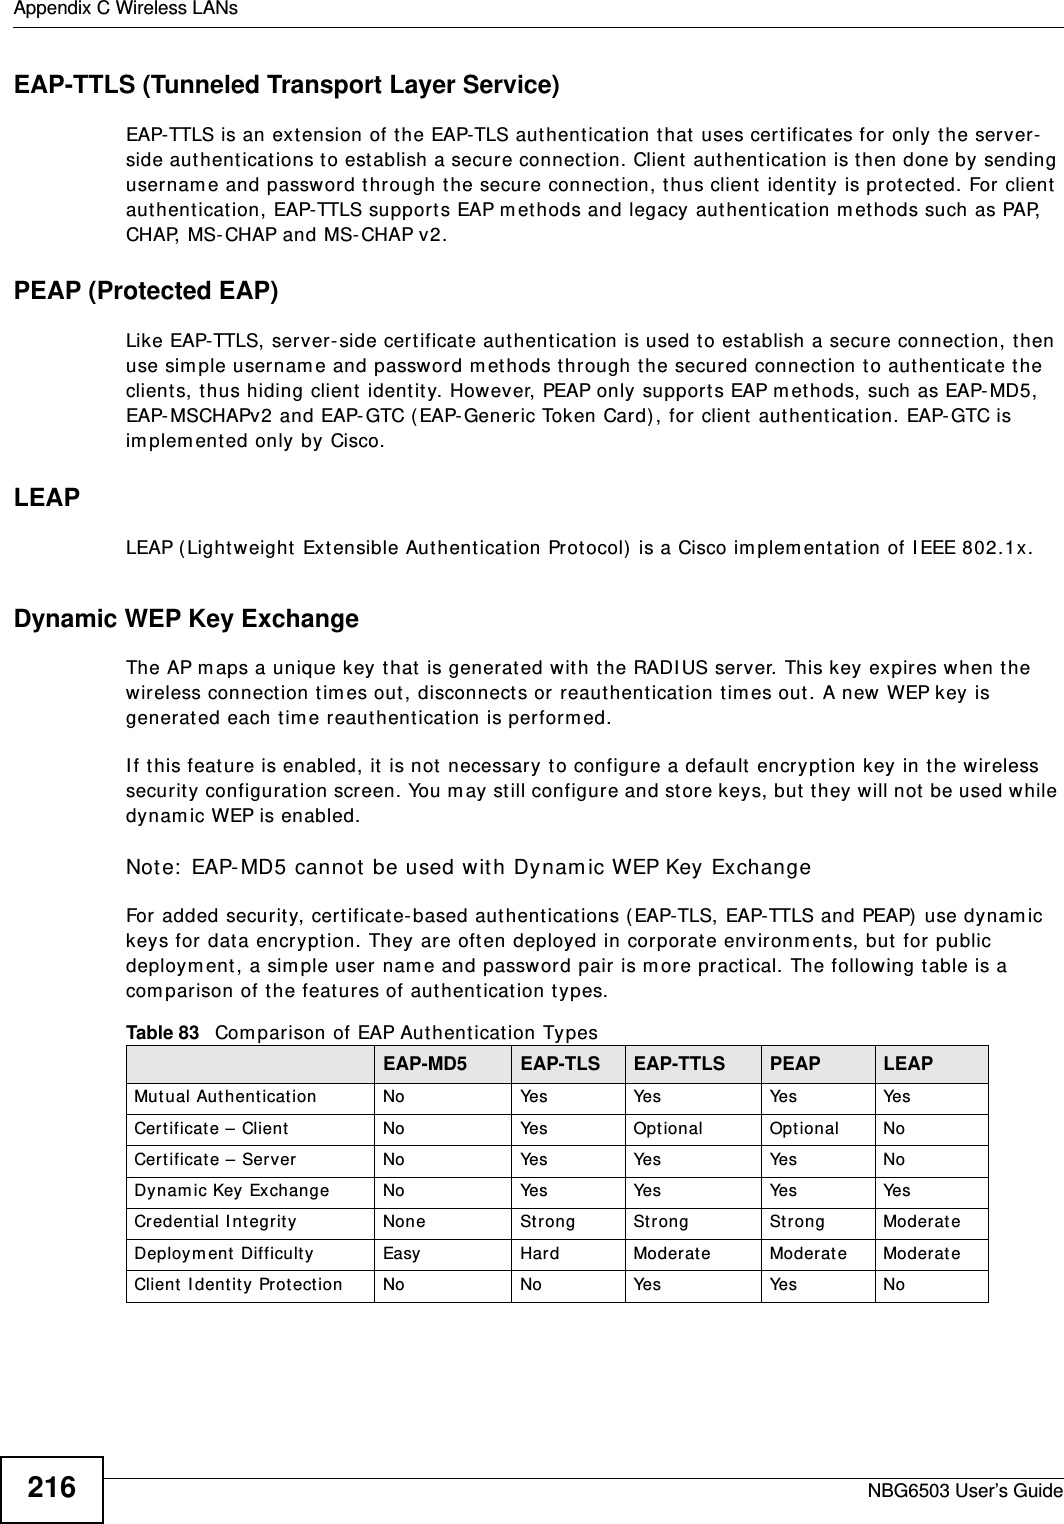 Appendix C Wireless LANsNBG6503 User’s Guide216EAP-TTLS (Tunneled Transport Layer Service) EAP-TTLS is an extension of the EAP-TLS authentication that uses certificates for only the server-side authentications to establish a secure connection. Client authentication is then done by sending username and password through the secure connection, thus client identity is protected. For client authentication, EAP-TTLS supports EAP methods and legacy authentication methods such as PAP, CHAP, MS-CHAP and MS-CHAP v2. PEAP (Protected EAP)   Like EAP-TTLS, server-side certificate authentication is used to establish a secure connection, then use simple username and password methods through the secured connection to authenticate the clients, thus hiding client identity. However, PEAP only supports EAP methods, such as EAP-MD5, EAP-MSCHAPv2 and EAP-GTC (EAP-Generic Token Card), for client authentication. EAP-GTC is implemented only by Cisco.LEAPLEAP (Lightweight Extensible Authentication Protocol) is a Cisco implementation of IEEE 802.1x. Dynamic WEP Key ExchangeThe AP maps a unique key that is generated with the RADIUS server. This key expires when the wireless connection times out, disconnects or reauthentication times out. A new WEP key is generated each time reauthentication is performed.If this feature is enabled, it is not necessary to configure a default encryption key in the wireless security configuration screen. You may still configure and store keys, but they will not be used while dynamic WEP is enabled.Note: EAP-MD5 cannot be used with Dynamic WEP Key ExchangeFor added security, certificate-based authentications (EAP-TLS, EAP-TTLS and PEAP) use dynamic keys for data encryption. They are often deployed in corporate environments, but for public deployment, a simple user name and password pair is more practical. The following table is a comparison of the features of authentication types.Table 83   Comparison of EAP Authentication TypesEAP-MD5 EAP-TLS EAP-TTLS PEAP LEAPMutual Authentication No Yes Yes Yes YesCertificate – Client No Yes Optional Optional NoCertificate – Server No Yes Yes Yes NoDynamic Key Exchange No Yes Yes Yes YesCredential Integrity None Strong Strong Strong ModerateDeployment Difficulty Easy Hard Moderate Moderate ModerateClient Identity Protection No No Yes Yes No